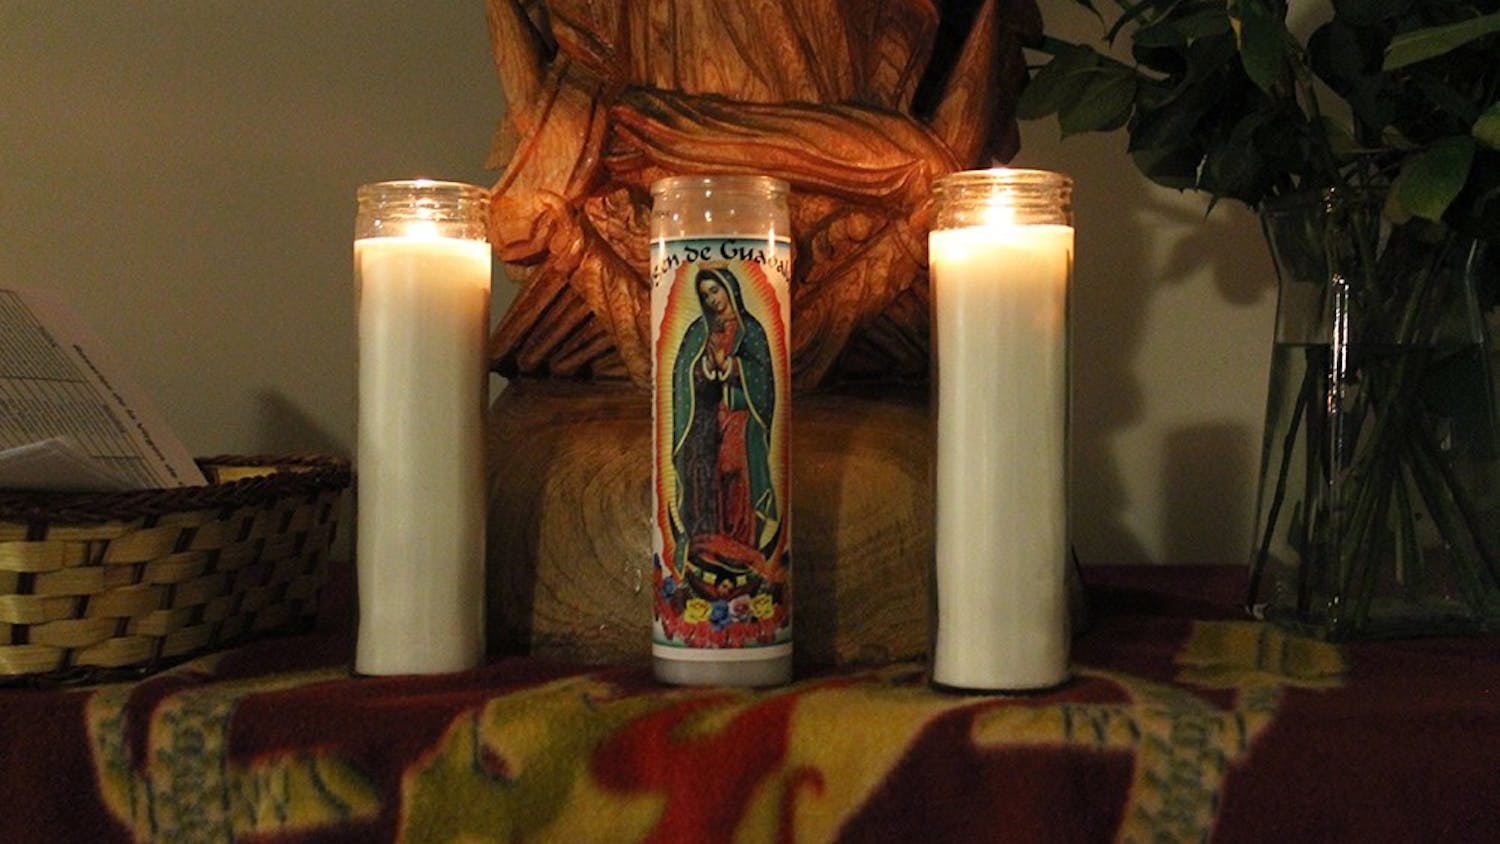 Roses, candles and the statue of the Virgin of Guadalupe is displayed during a rosary. In the origin story of the Virgin, she appeared to Juan Diego telling him to gather roses on the Hill of Tepeyec, a miracle since the hill should have been bare in December.